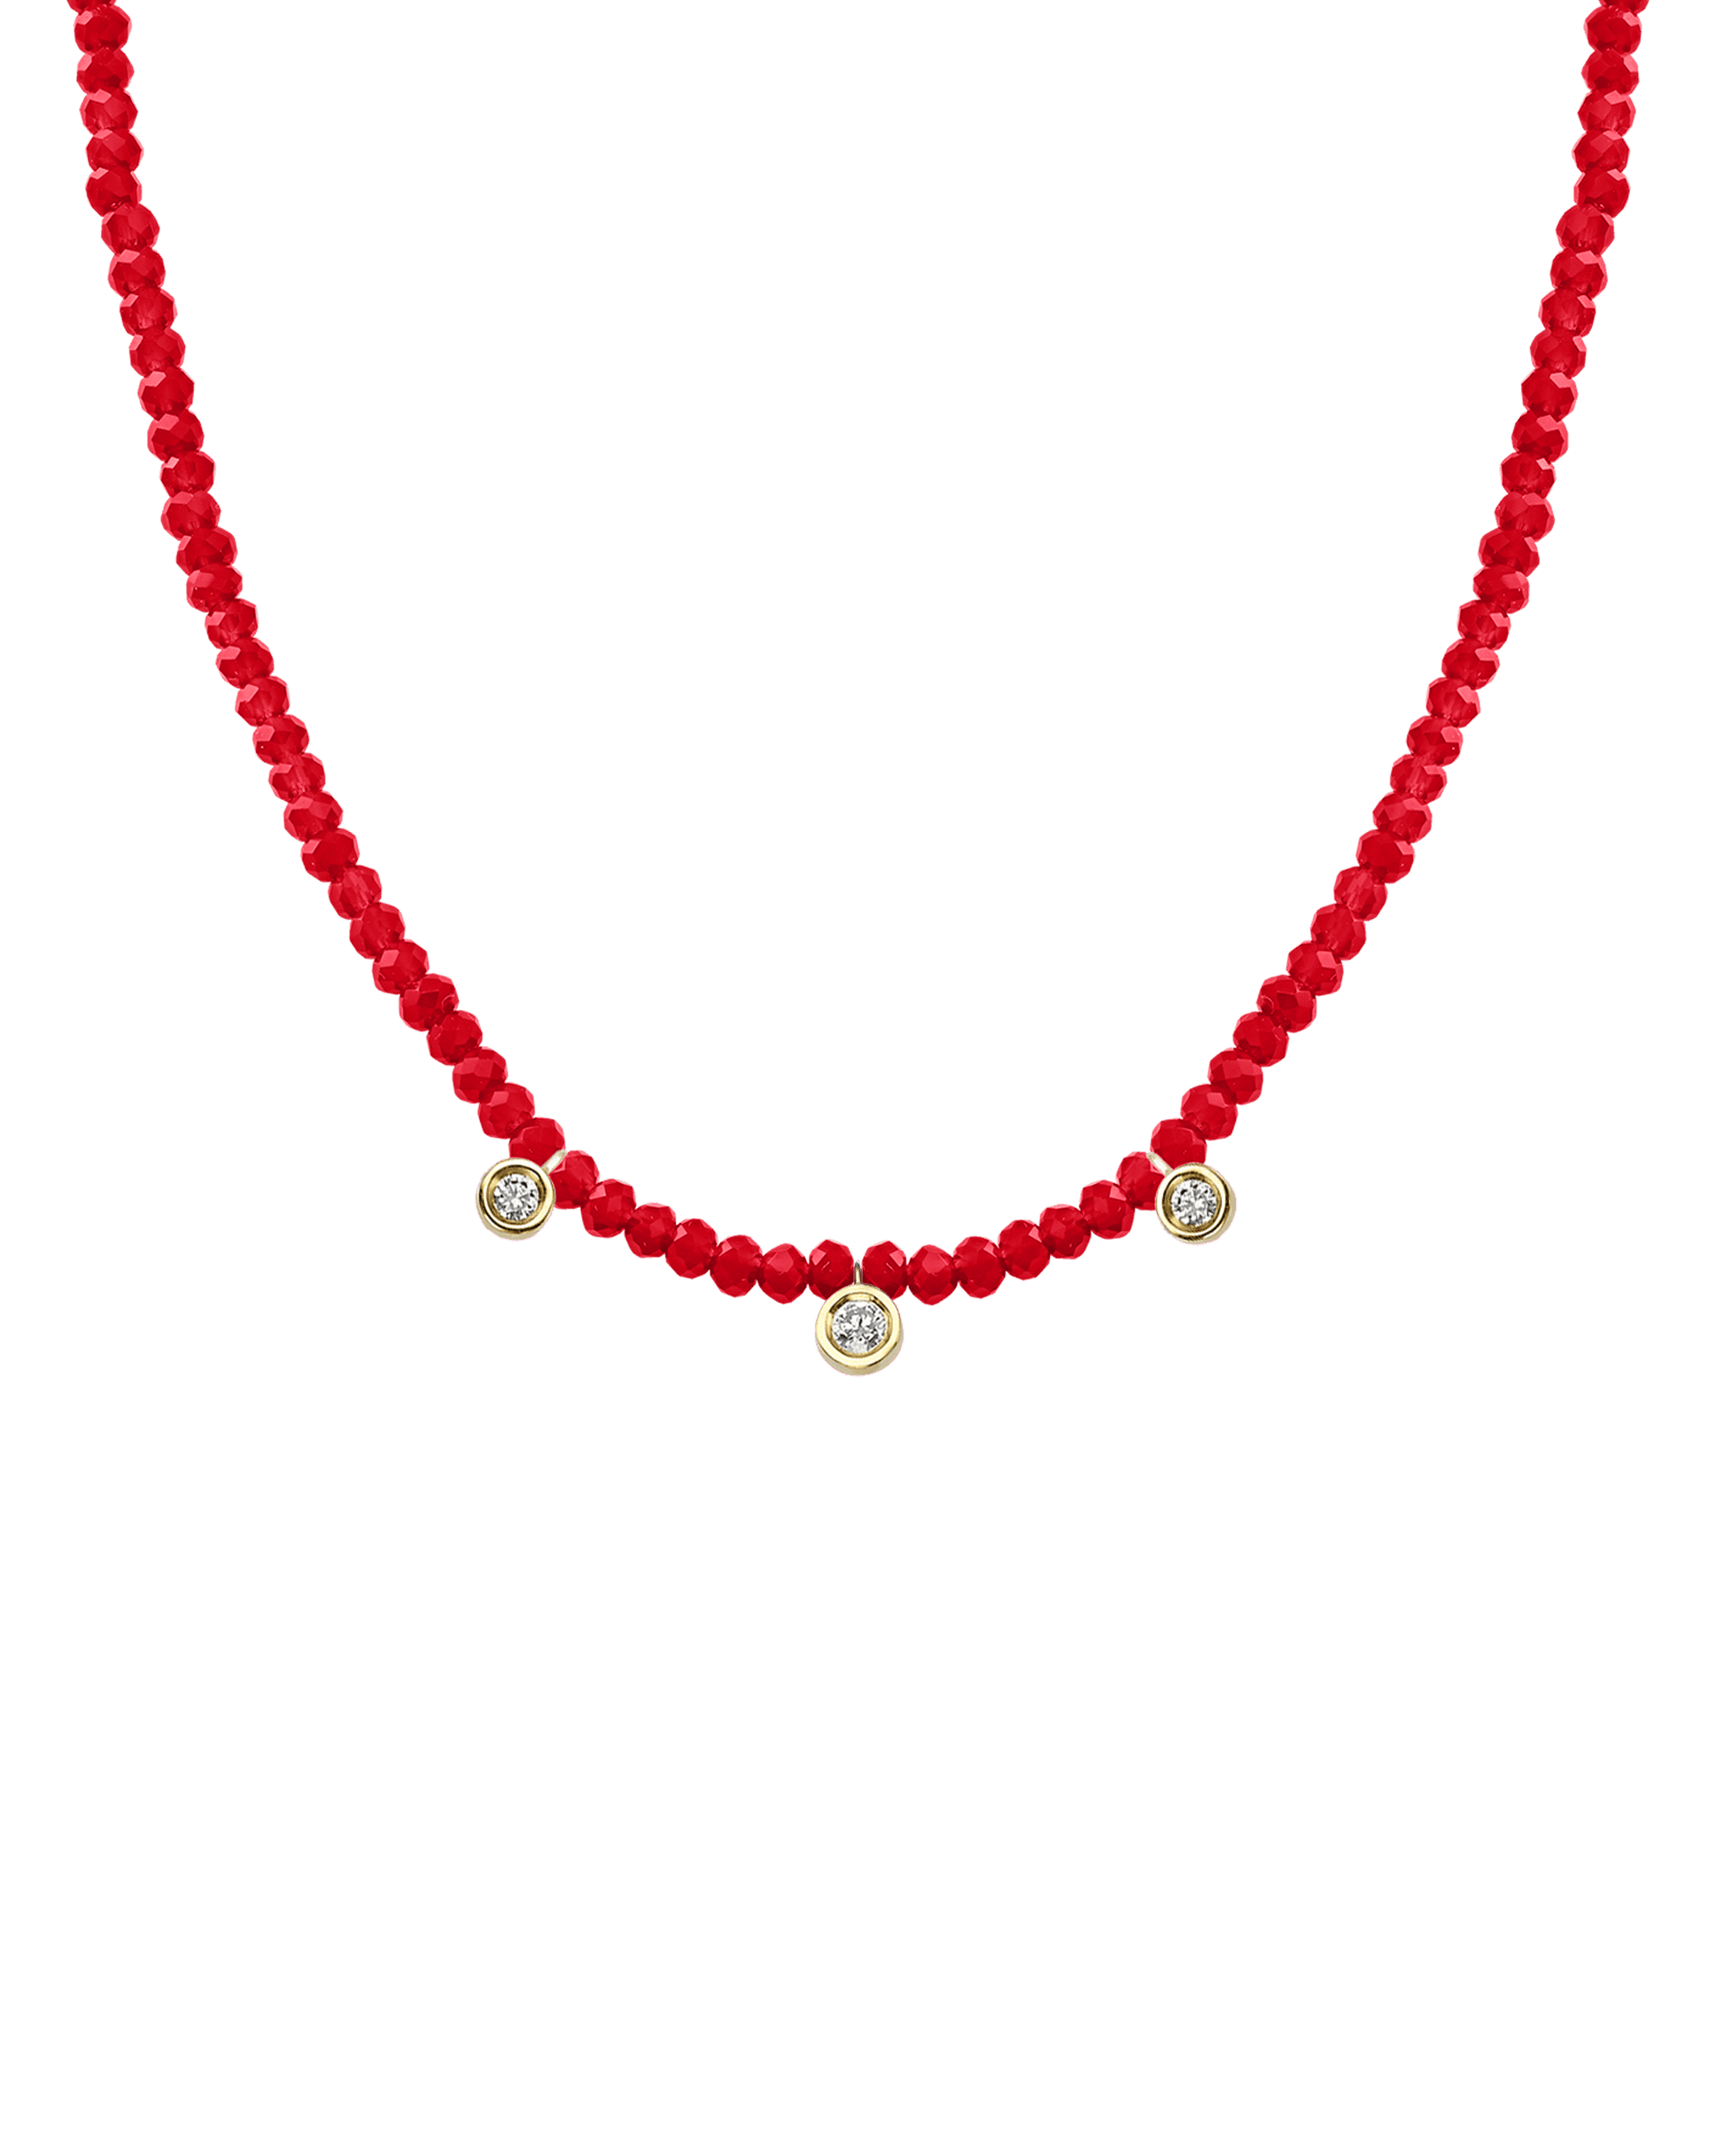 Emerald Gemstone & Three diamonds Necklace - 14K Yellow Gold Necklaces magal-dev Natural Red Jade 14" - Collar 